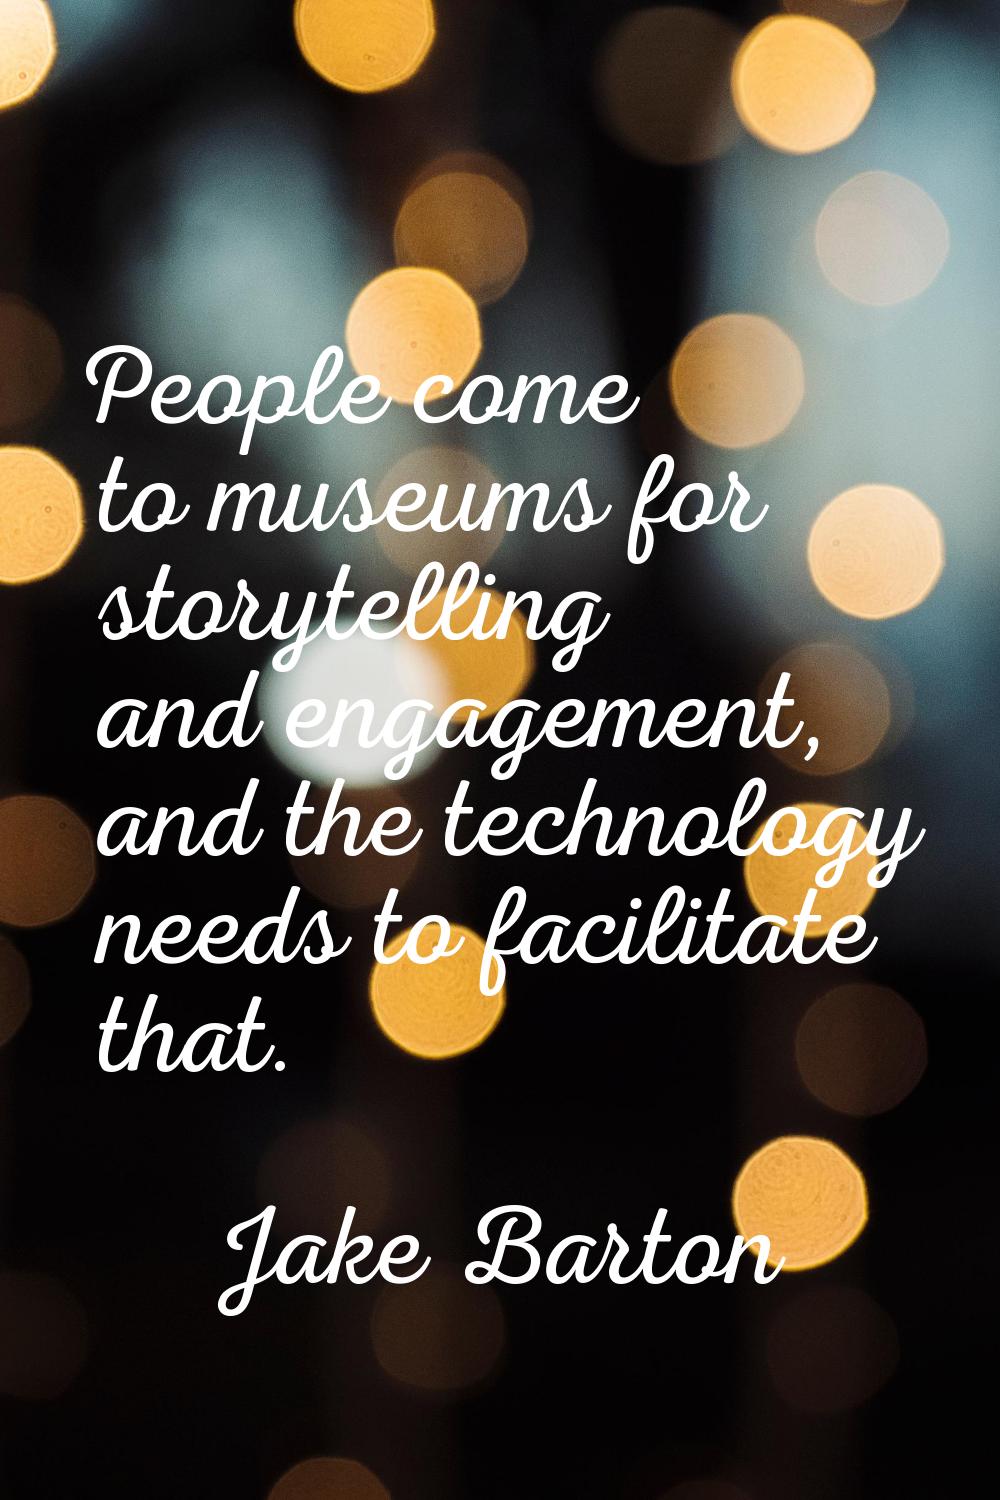 People come to museums for storytelling and engagement, and the technology needs to facilitate that